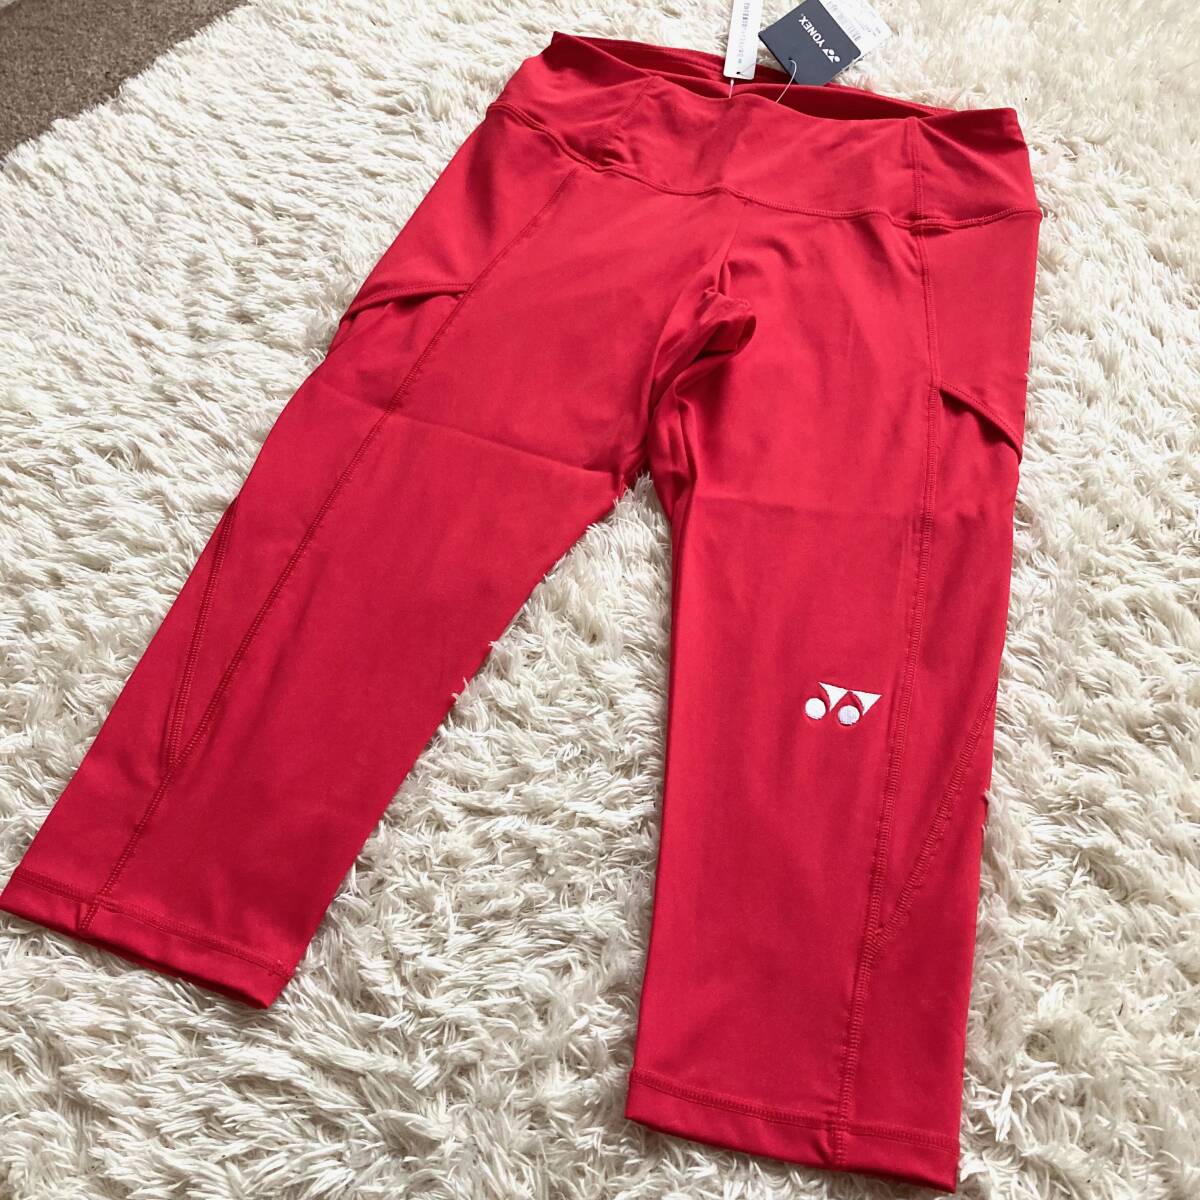  new goods unused YONEX Yonex 6 minute height leggings tights lady's L red spats red badminton tennis woman spring summer sport 